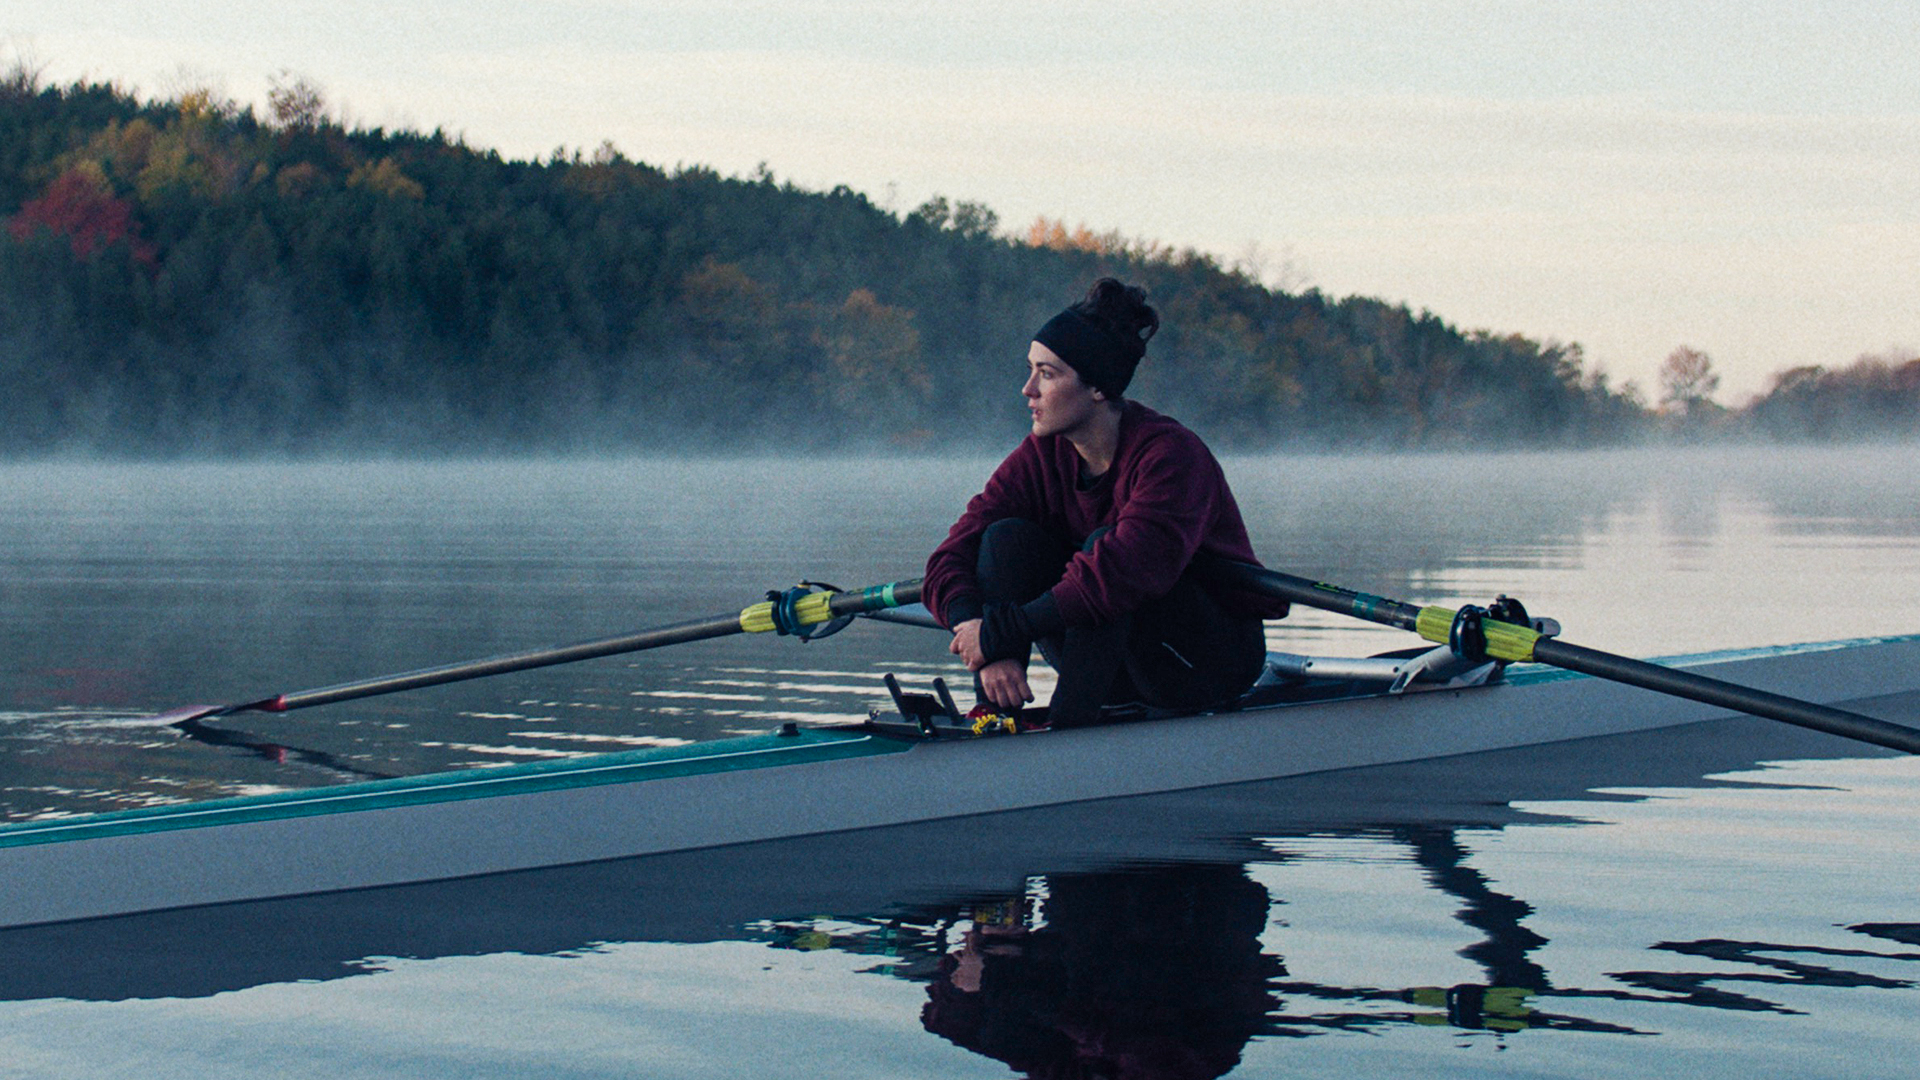 BLISTERS, BURNOUT & BRUTAL TRAINING: WHAT THE NOVICE GETS RIGHT ABOUT COLLEGE ROWING